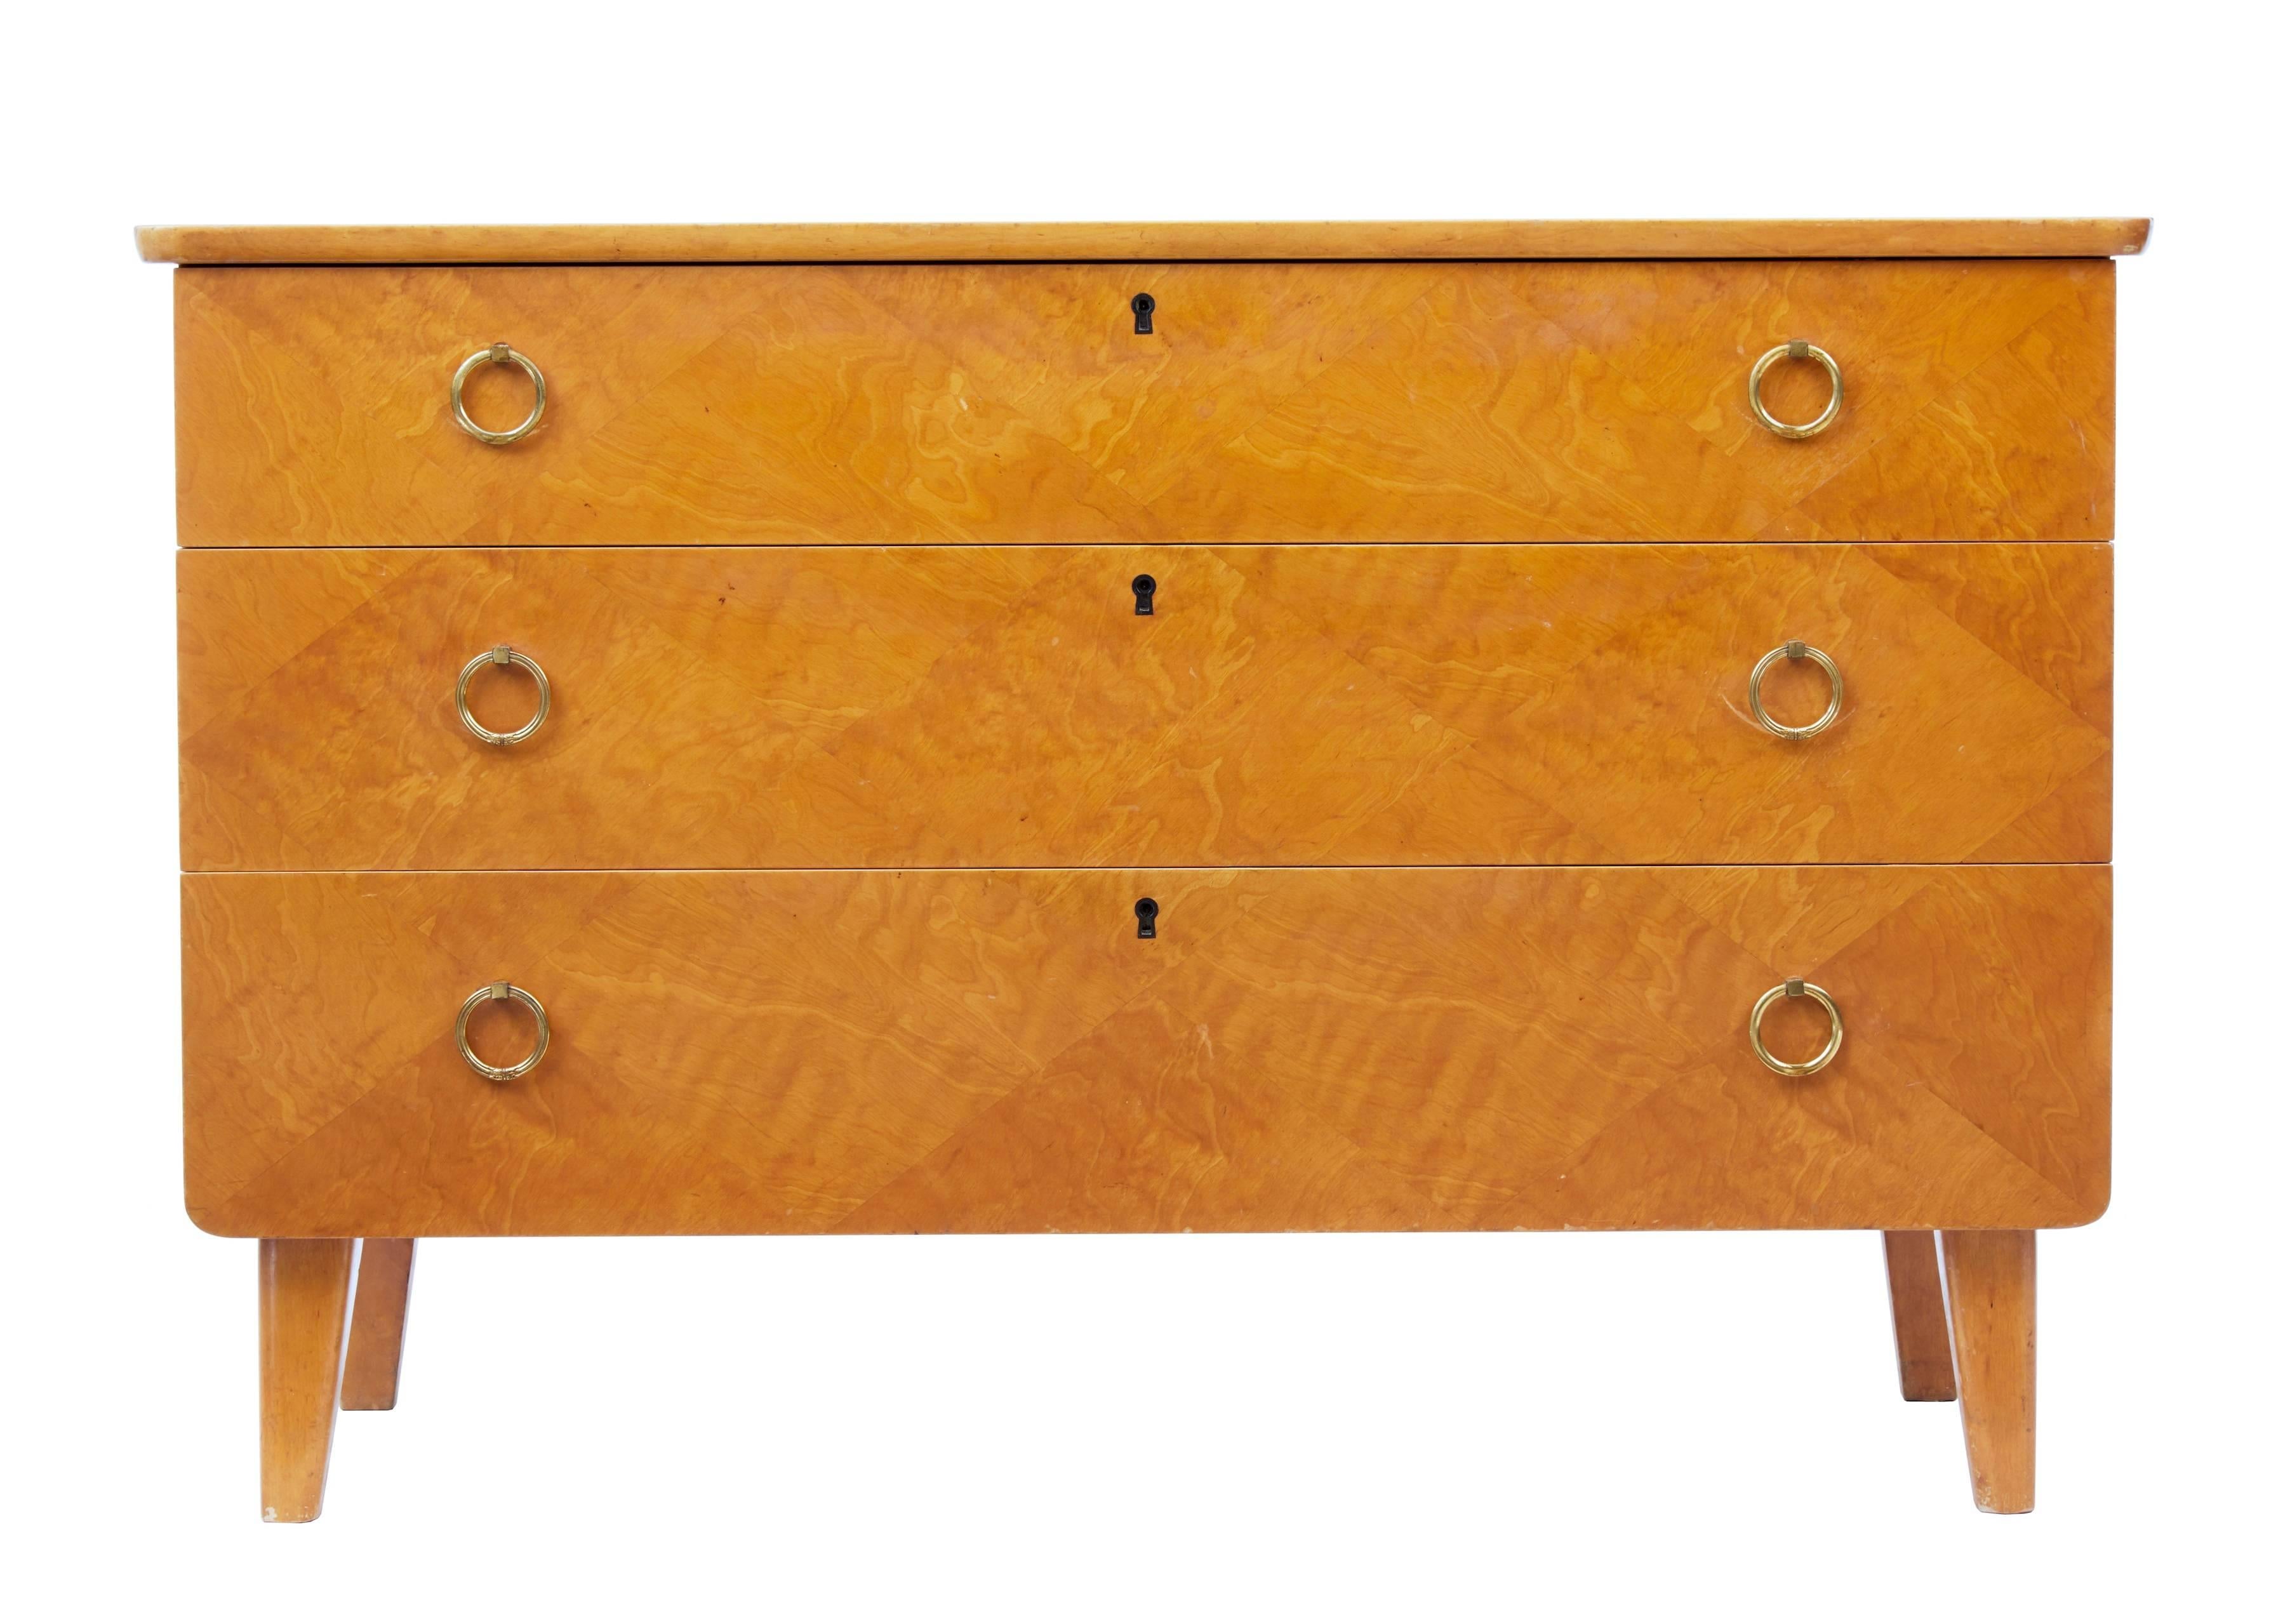 A fine looking birch chest of drawers, circa 1950.
Diamond patterned arrangement to the veneer on the drawer fronts.
Three drawers with brass looped handles.
Minor surface marks.


Measures: Height 25 1/2